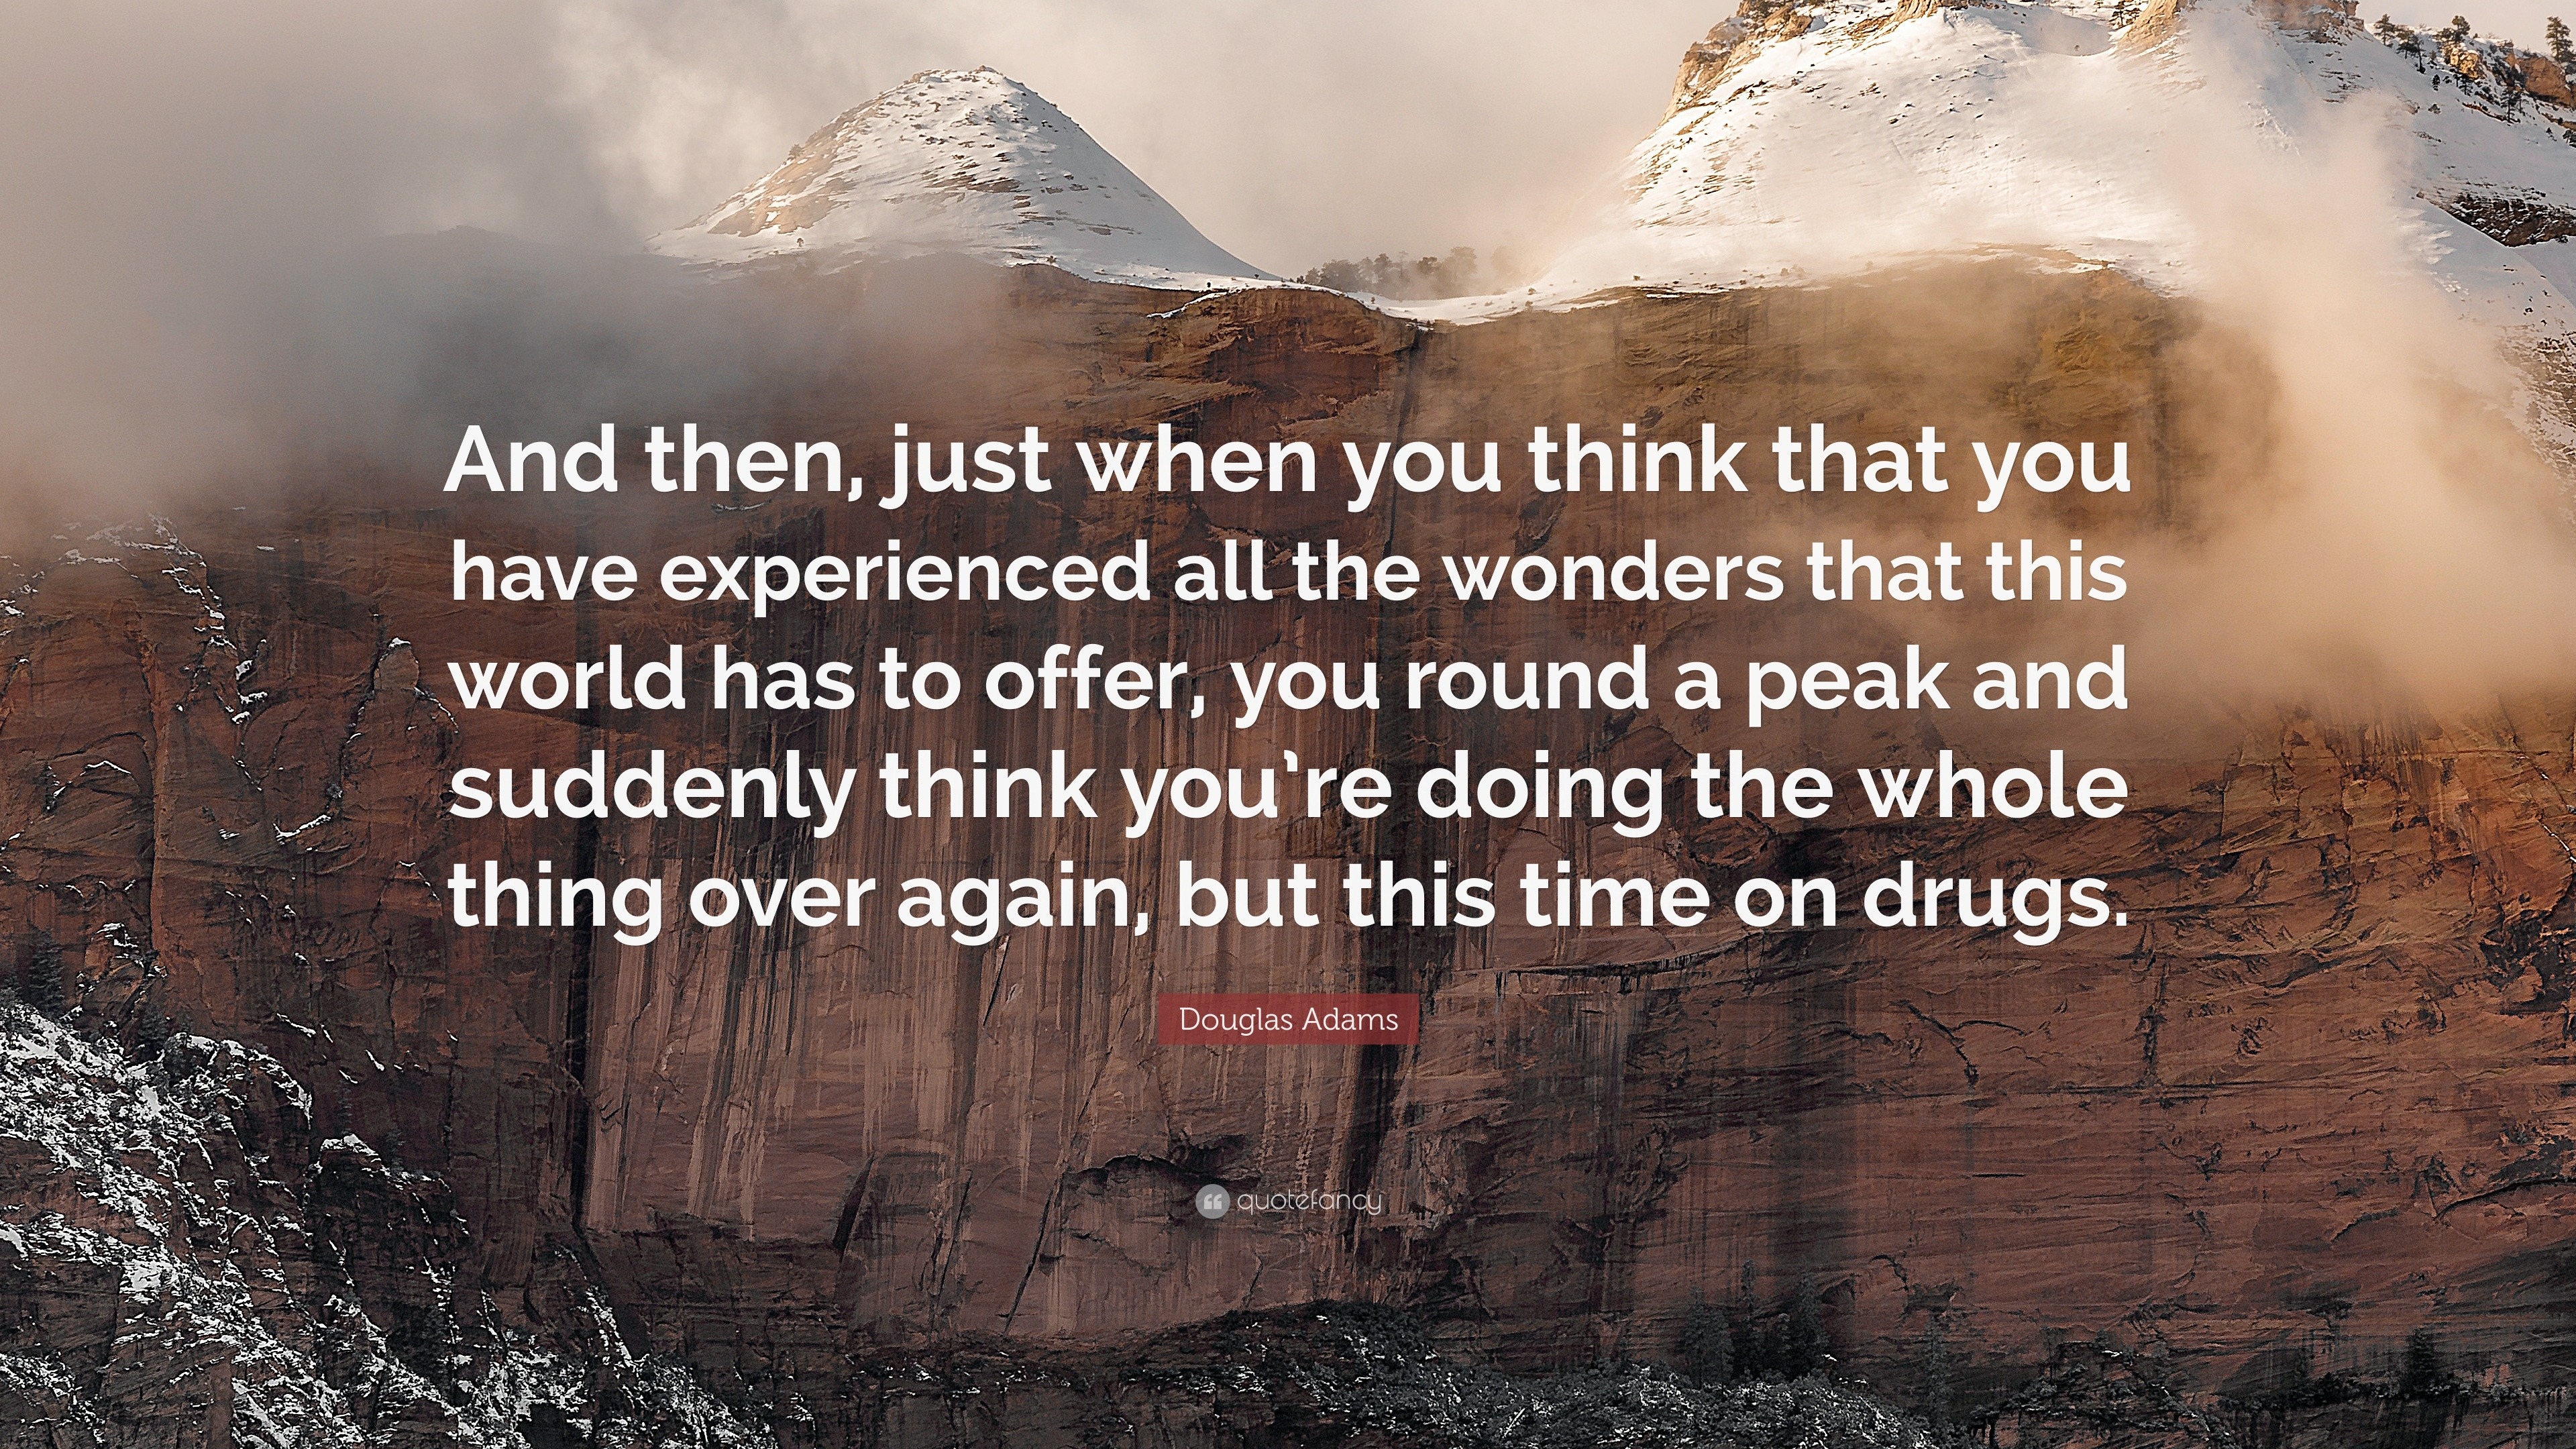 Douglas Adams Quote: “And then, just when you think that you have  experienced all the wonders that this world has to offer, you round a peak a ”